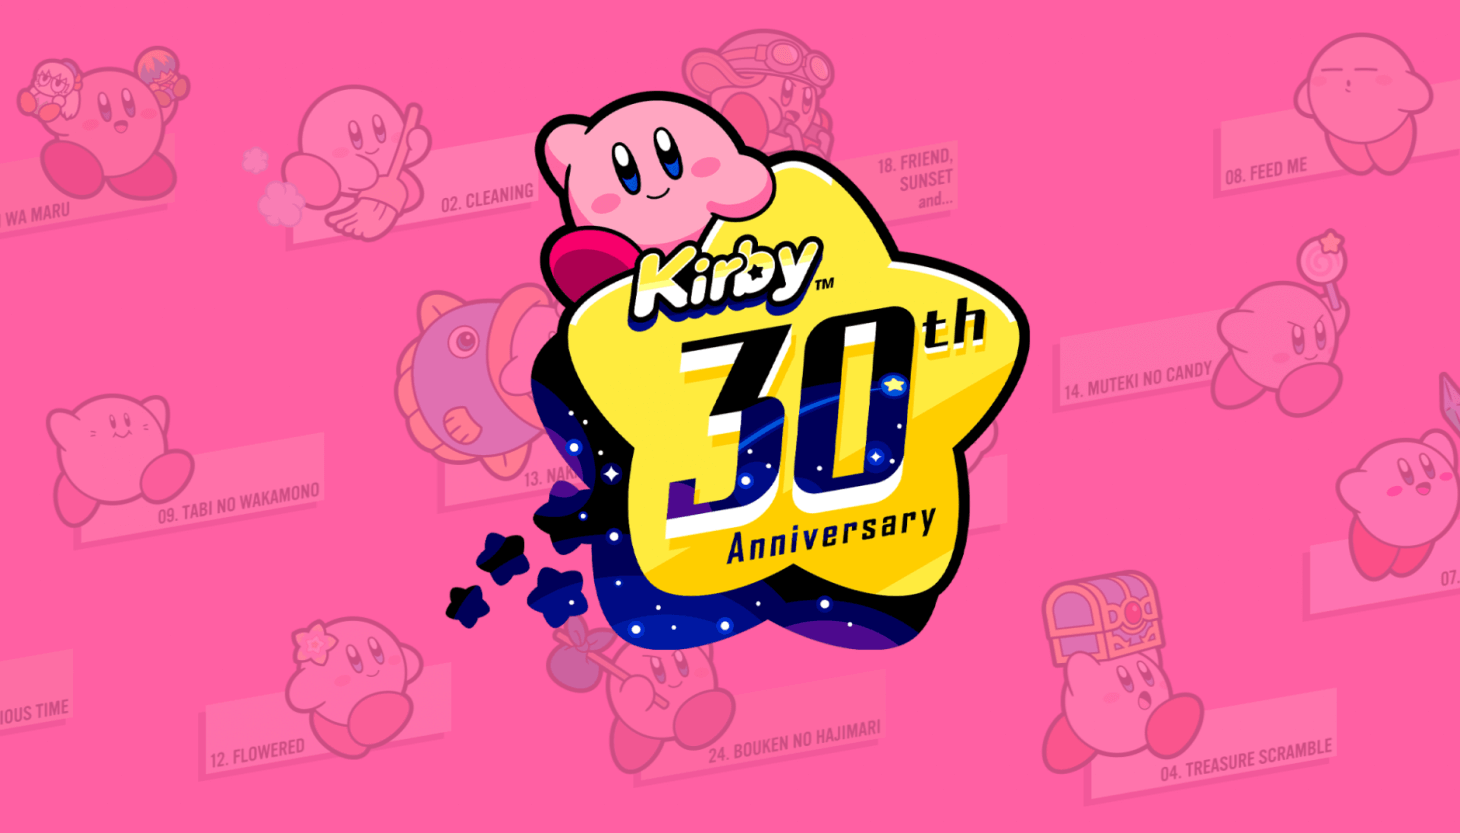 Nintendo shares more live concert music from Kirby's 25th anniversary for  Kirby's 30th anniversary — Game Music 4 All